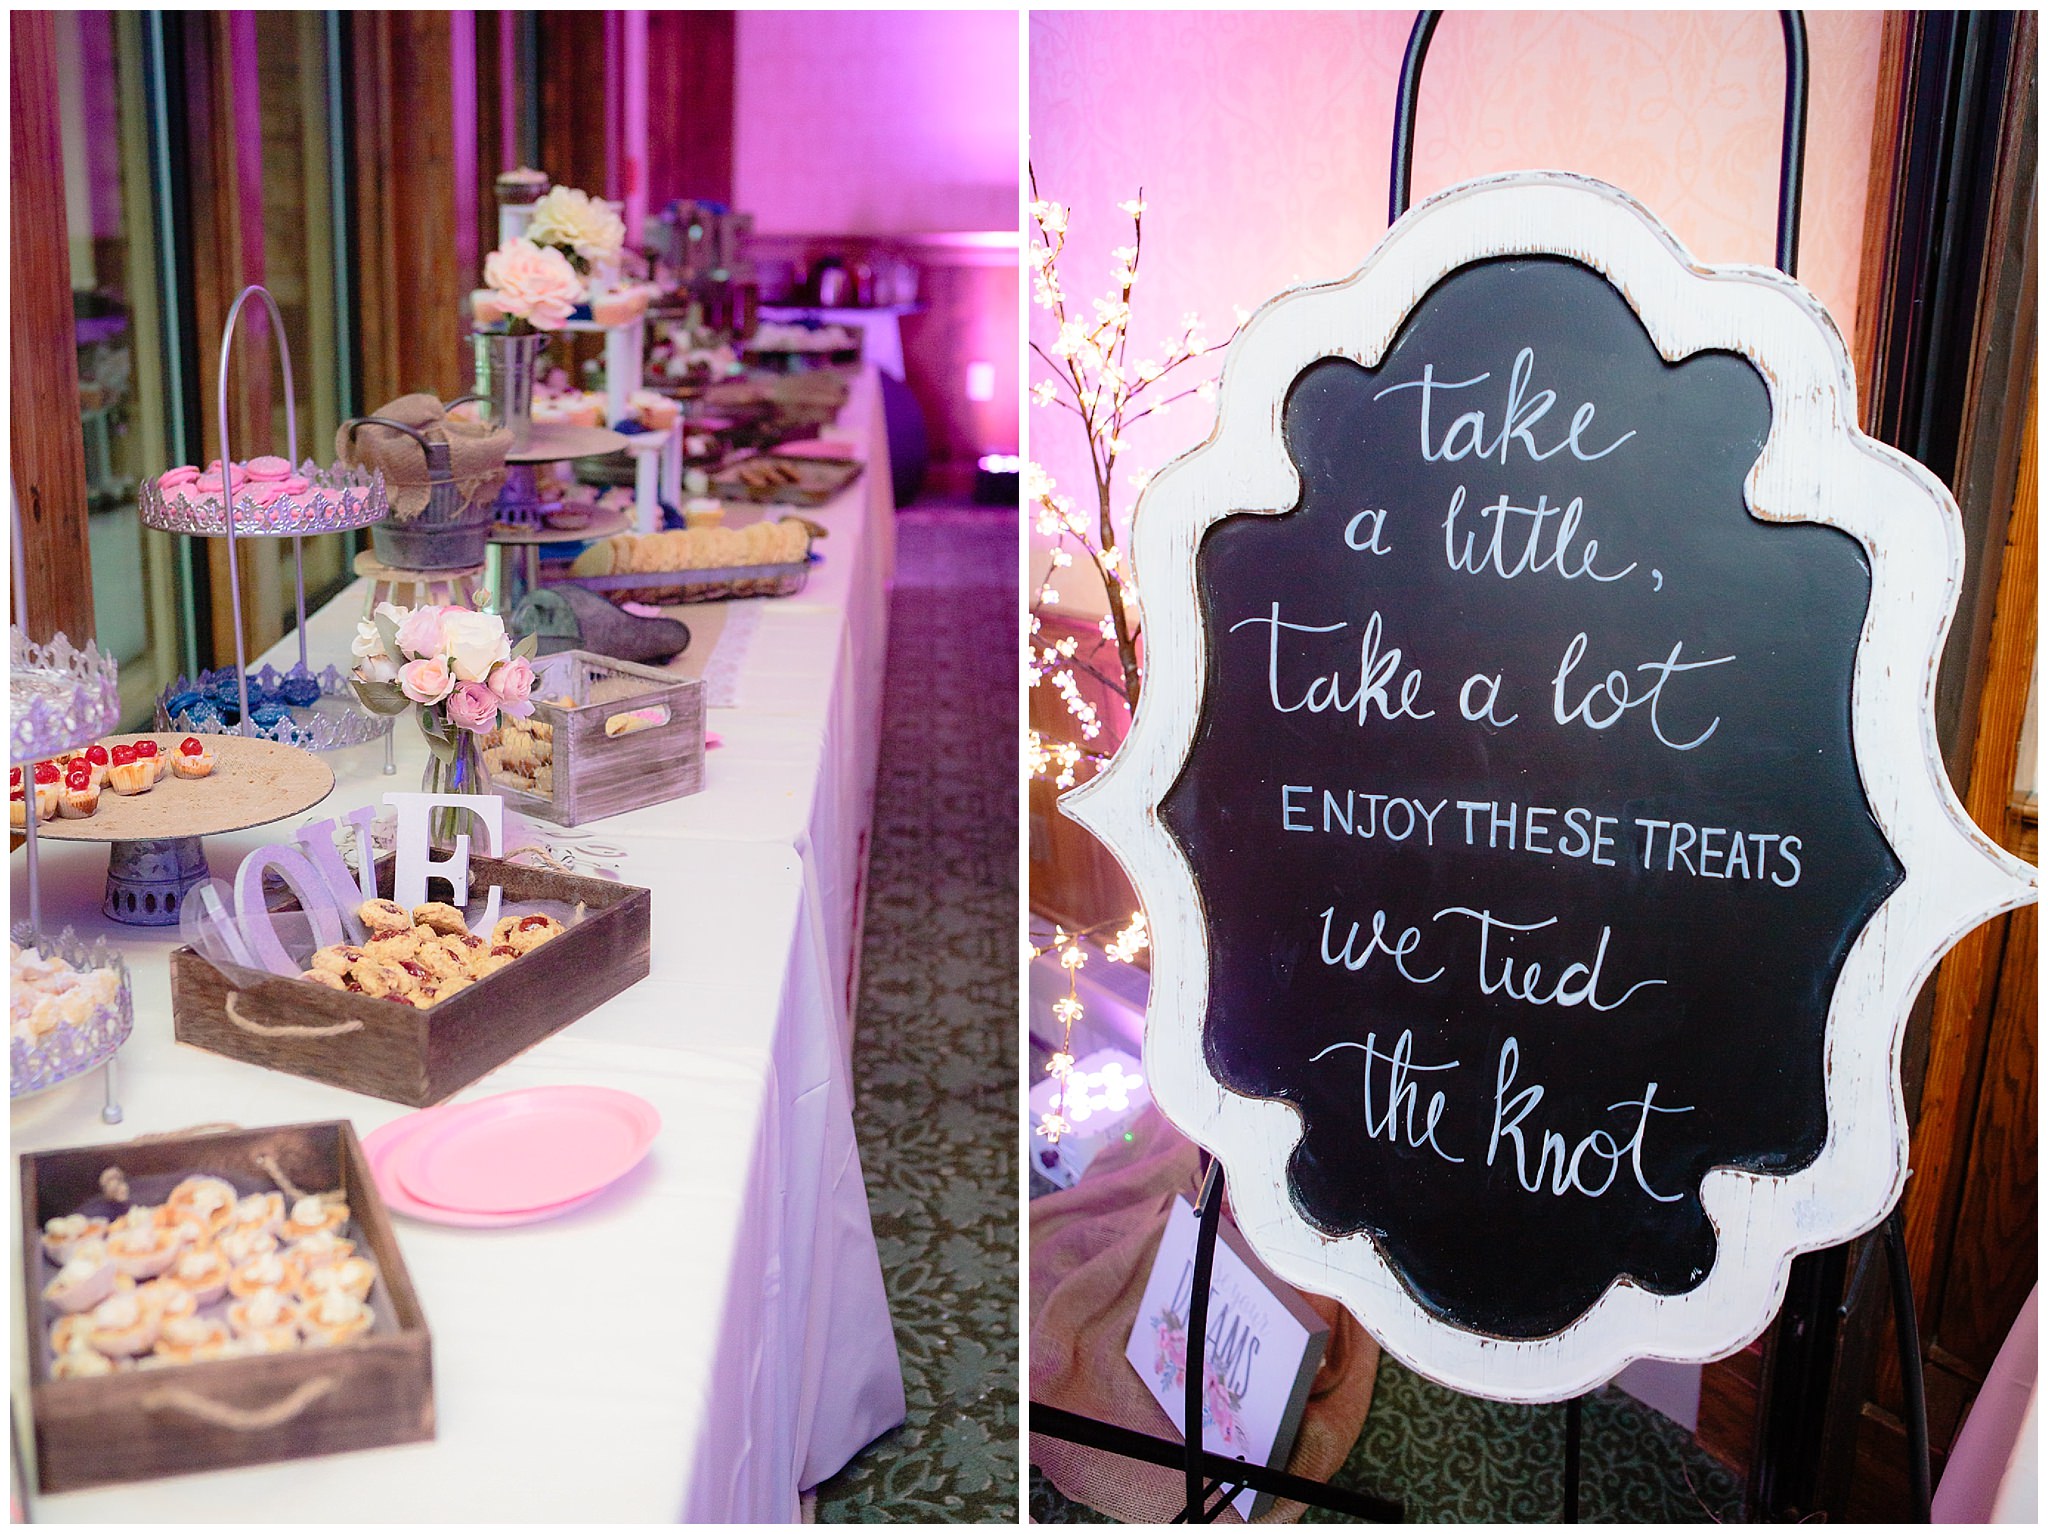 Cookie table spread and chalkboard sign at an Oglebay wedding reception